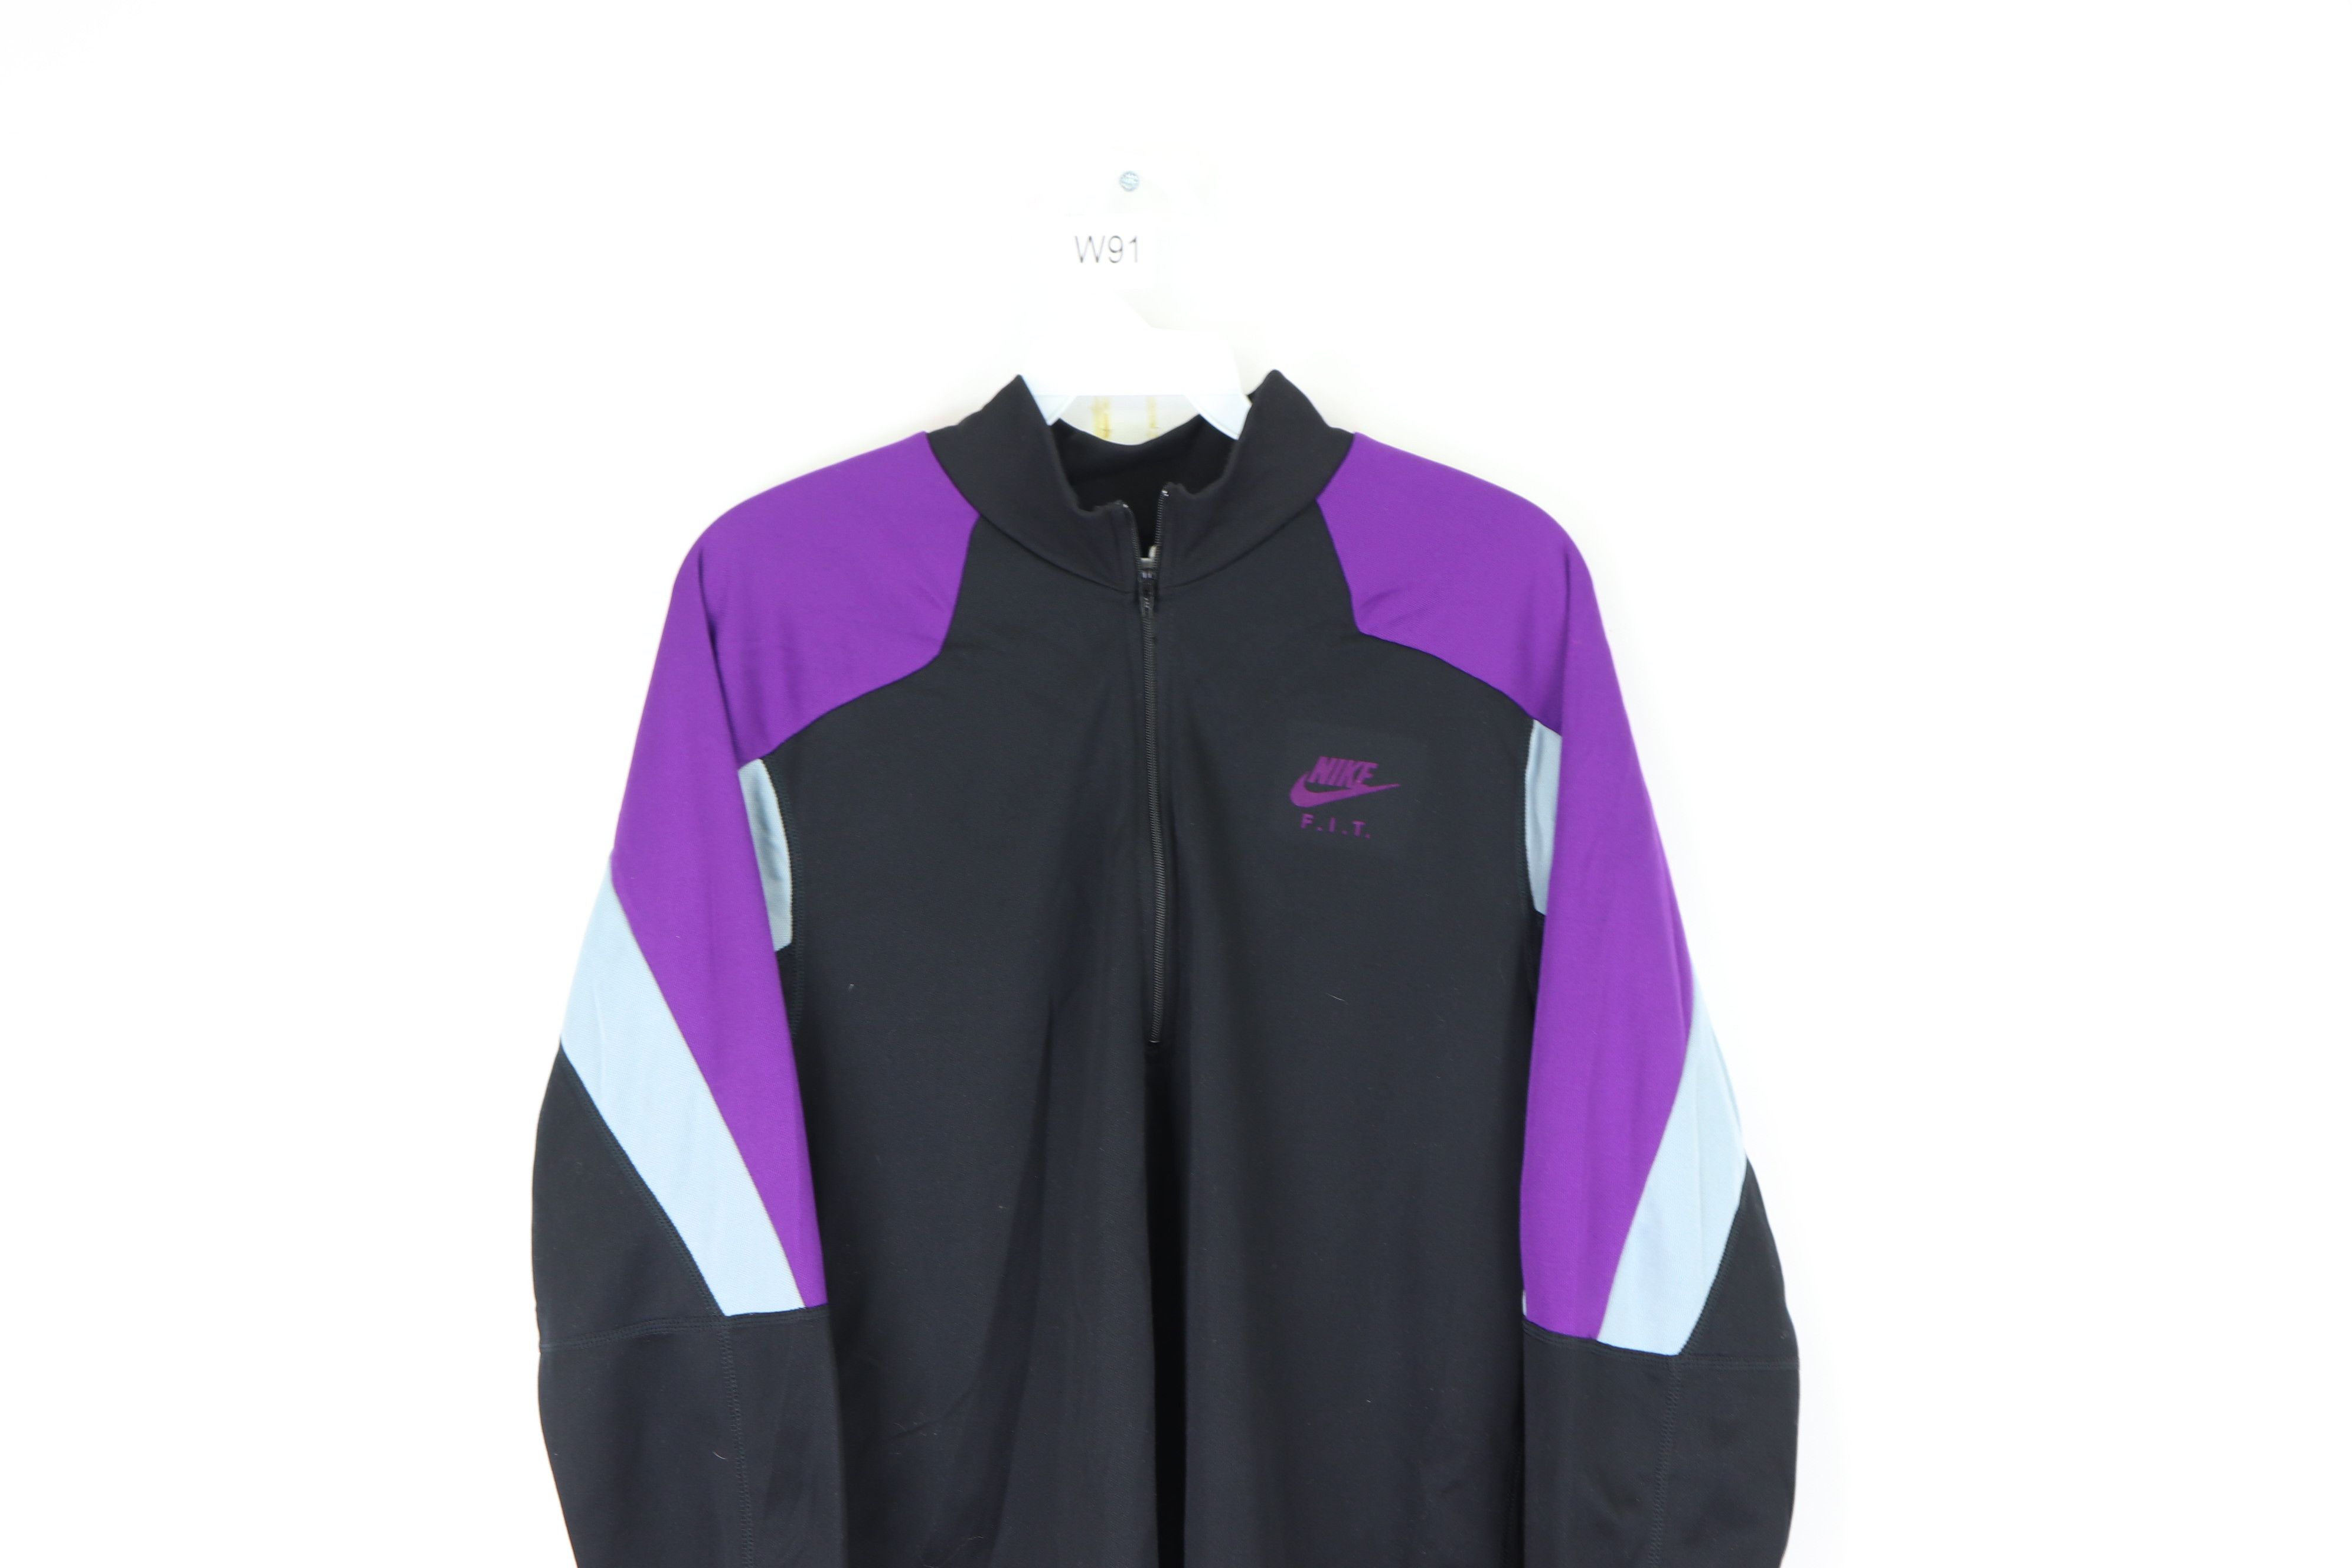 Nike Vintage 80s Nike International FIT Color Block Zip Sweater Size US S / EU 44-46 / 1 - 2 Preview